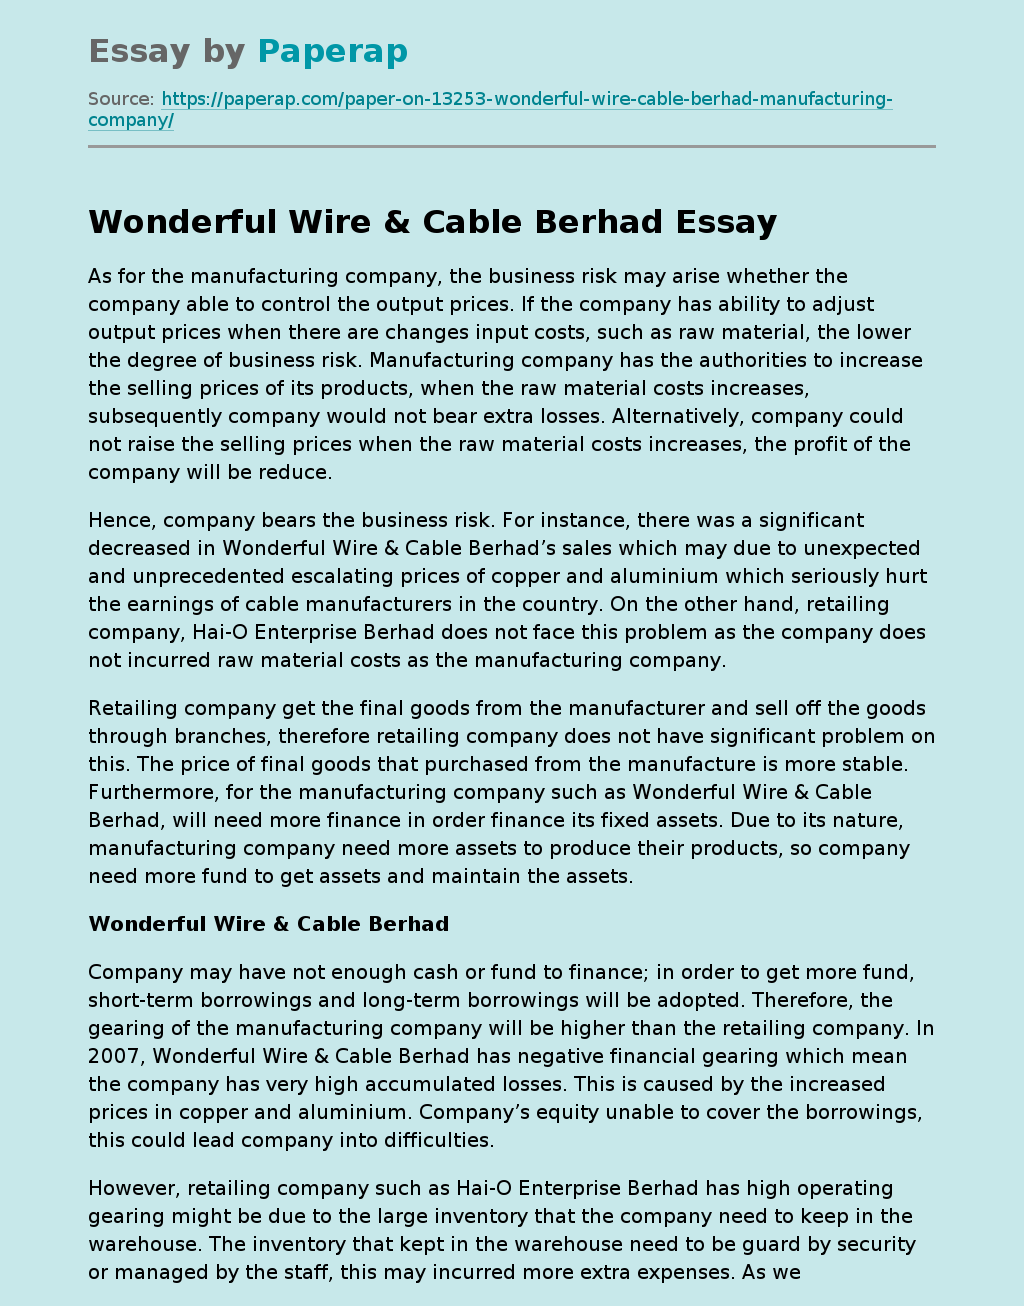 Wonderful Wire & Cable Berhad